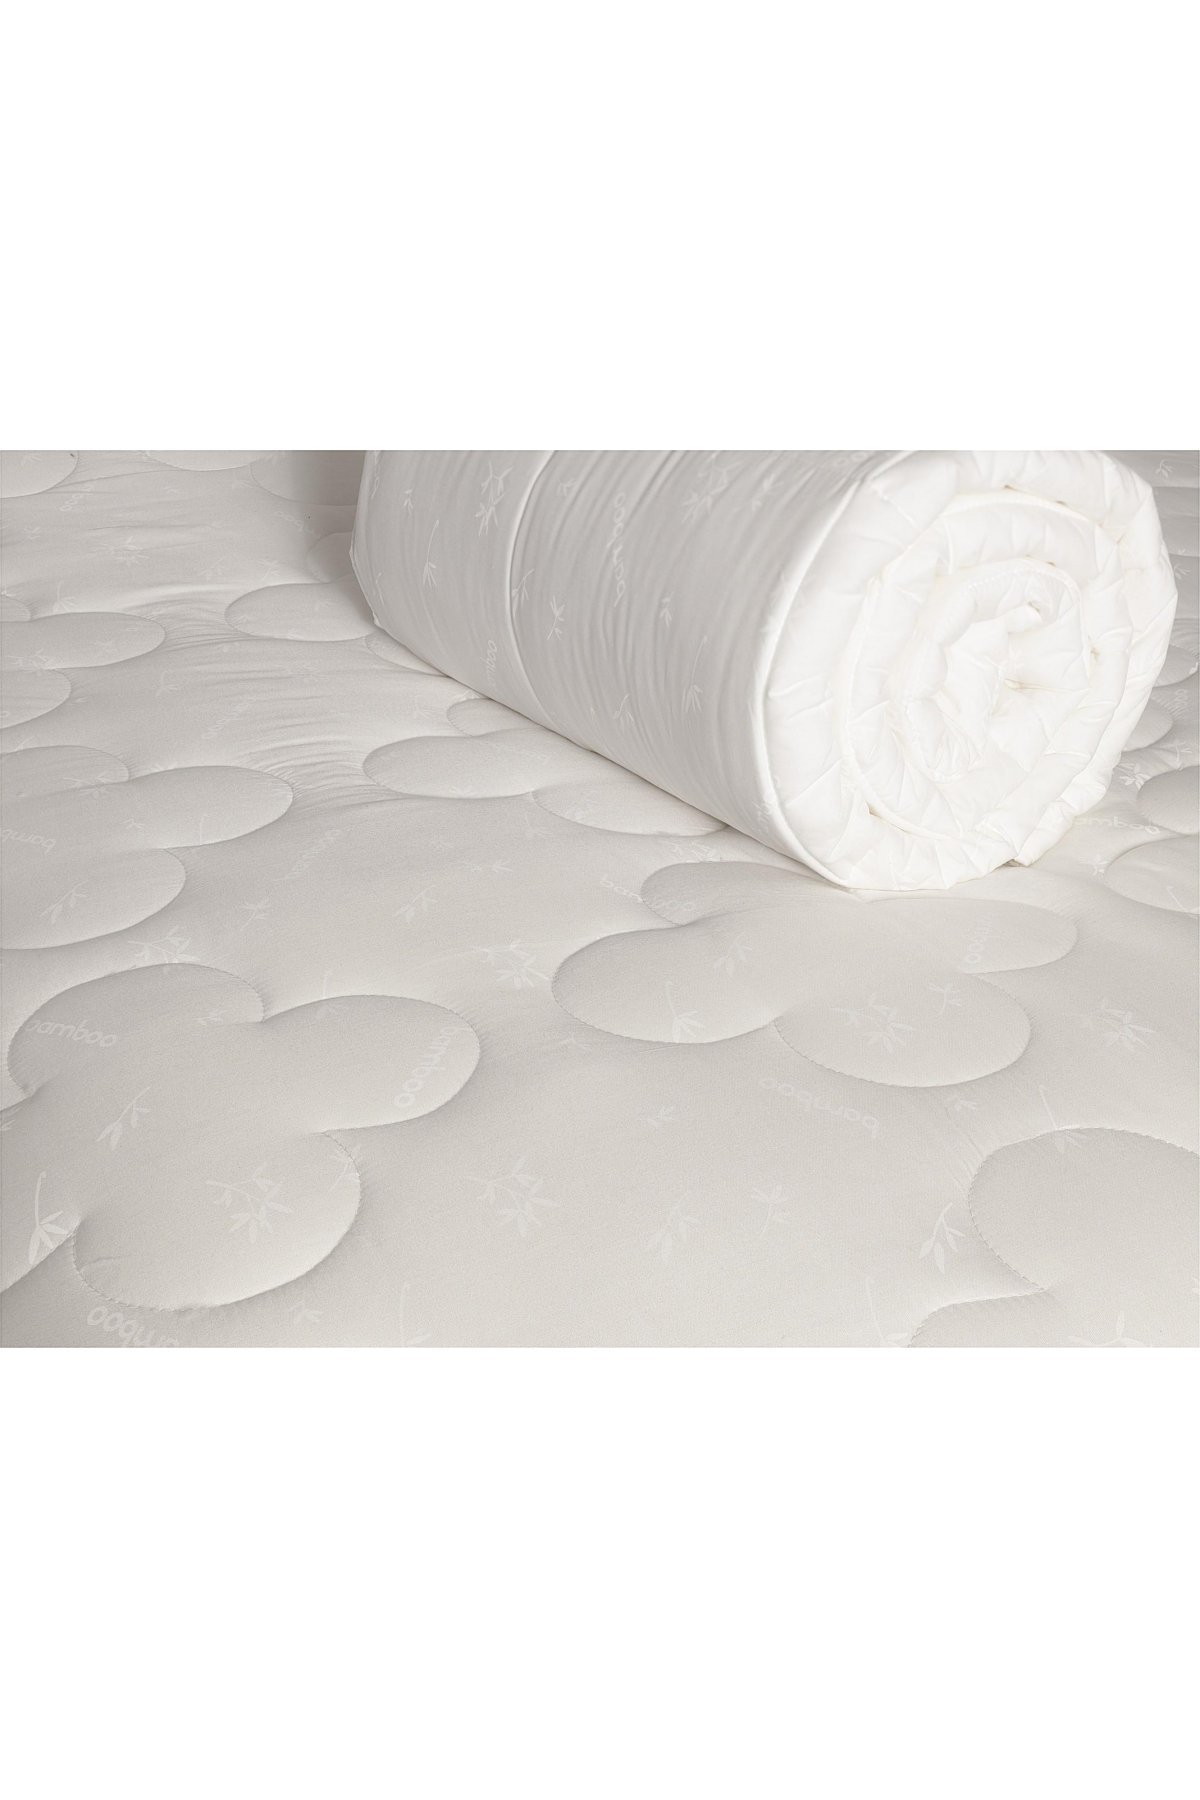 QUILT COVER-White